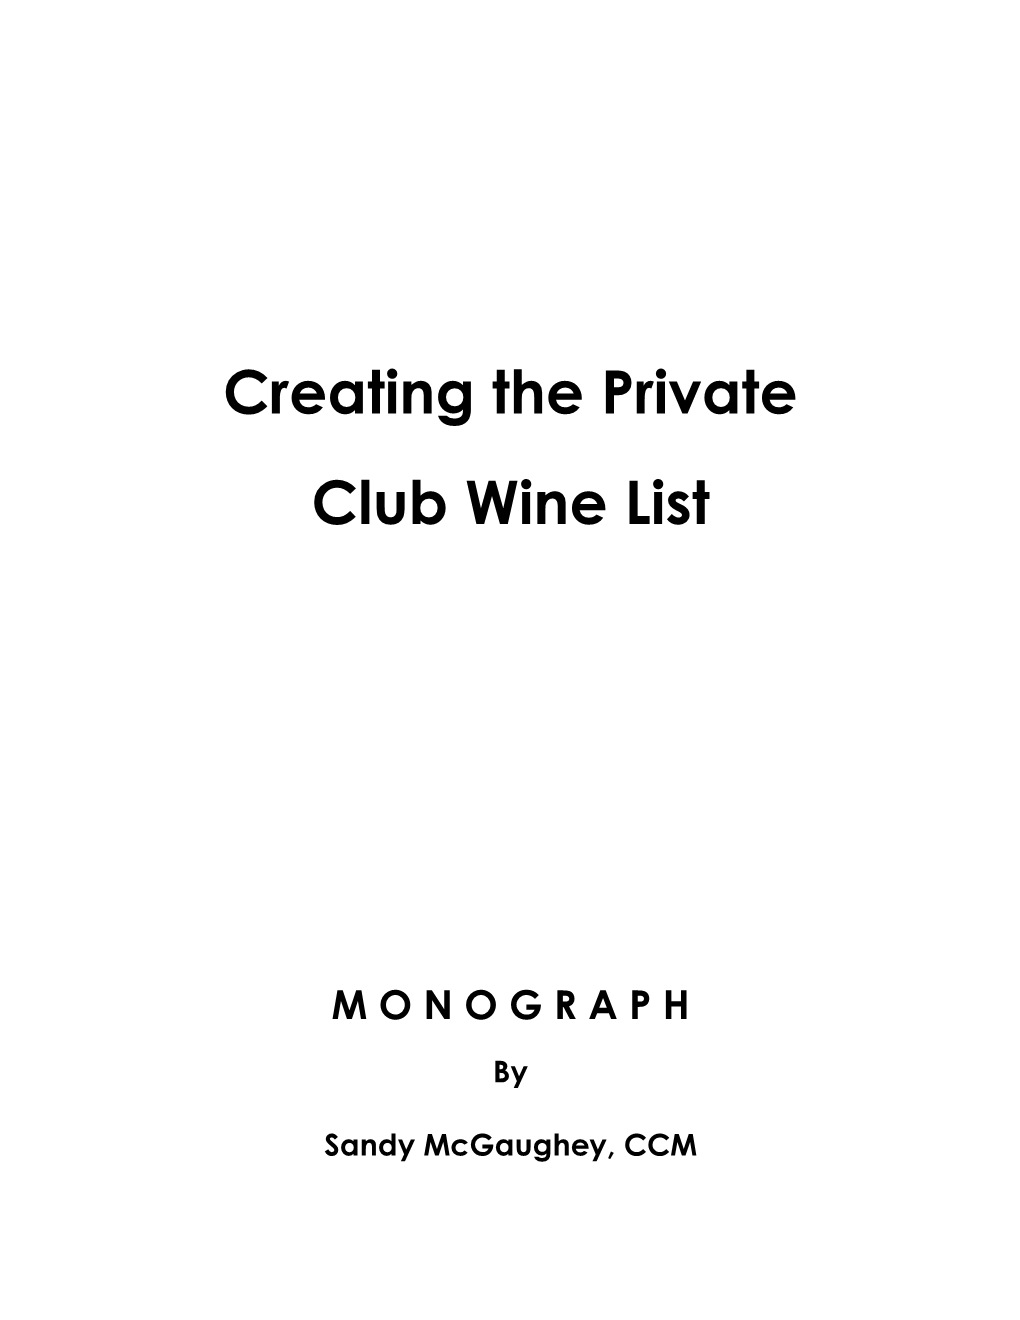 Creating the Private Club Wine List